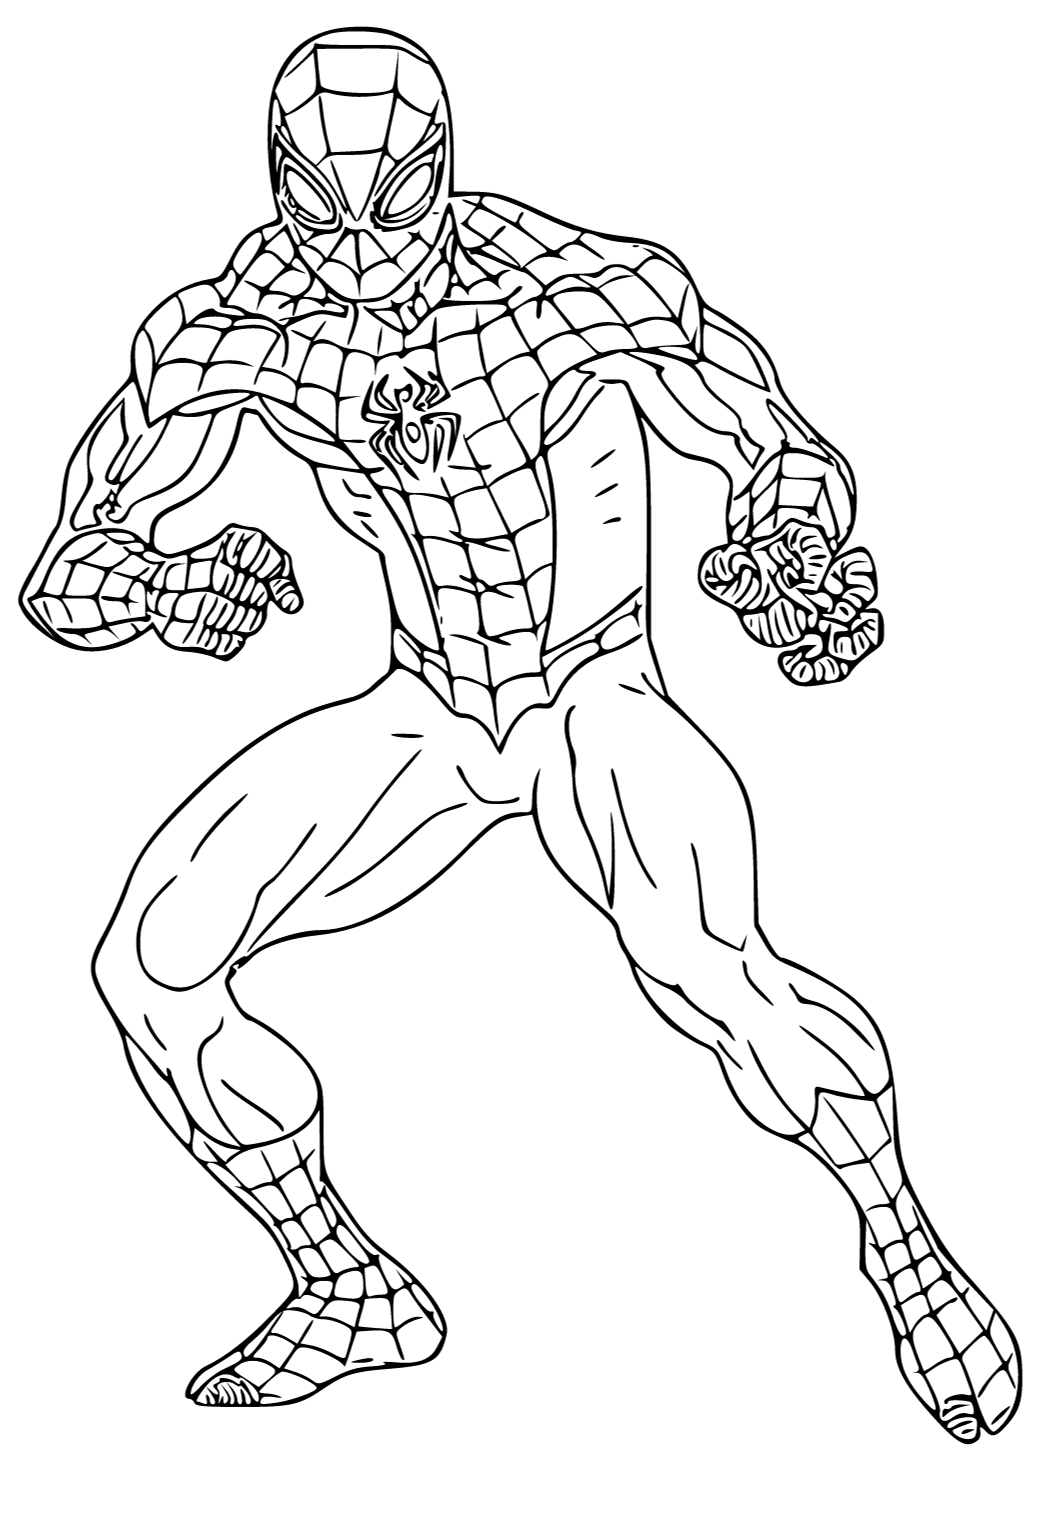 Free printable spiderman confidence coloring page for adults and kids